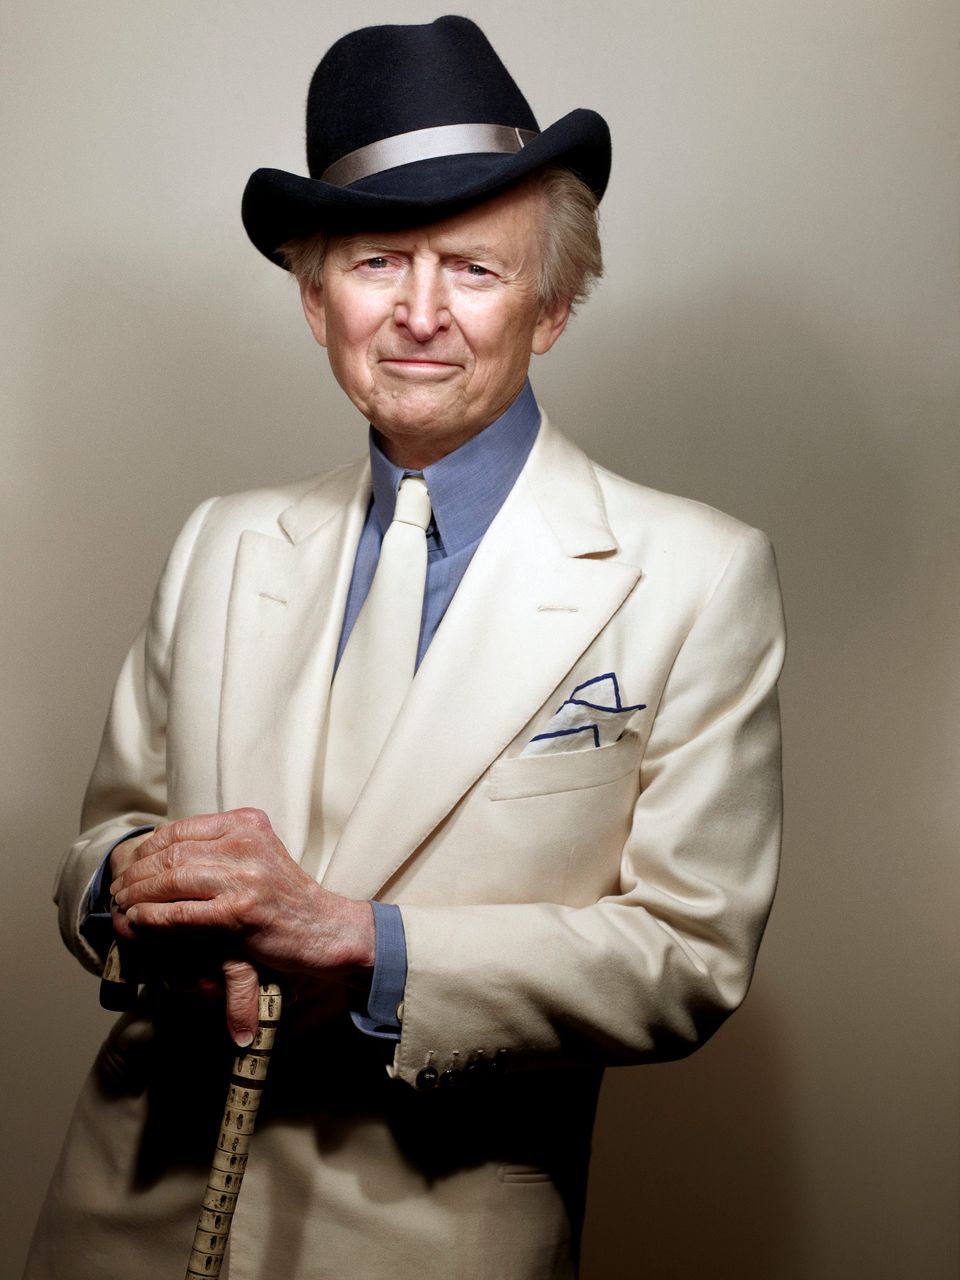 An Evening With Tom Wolfe